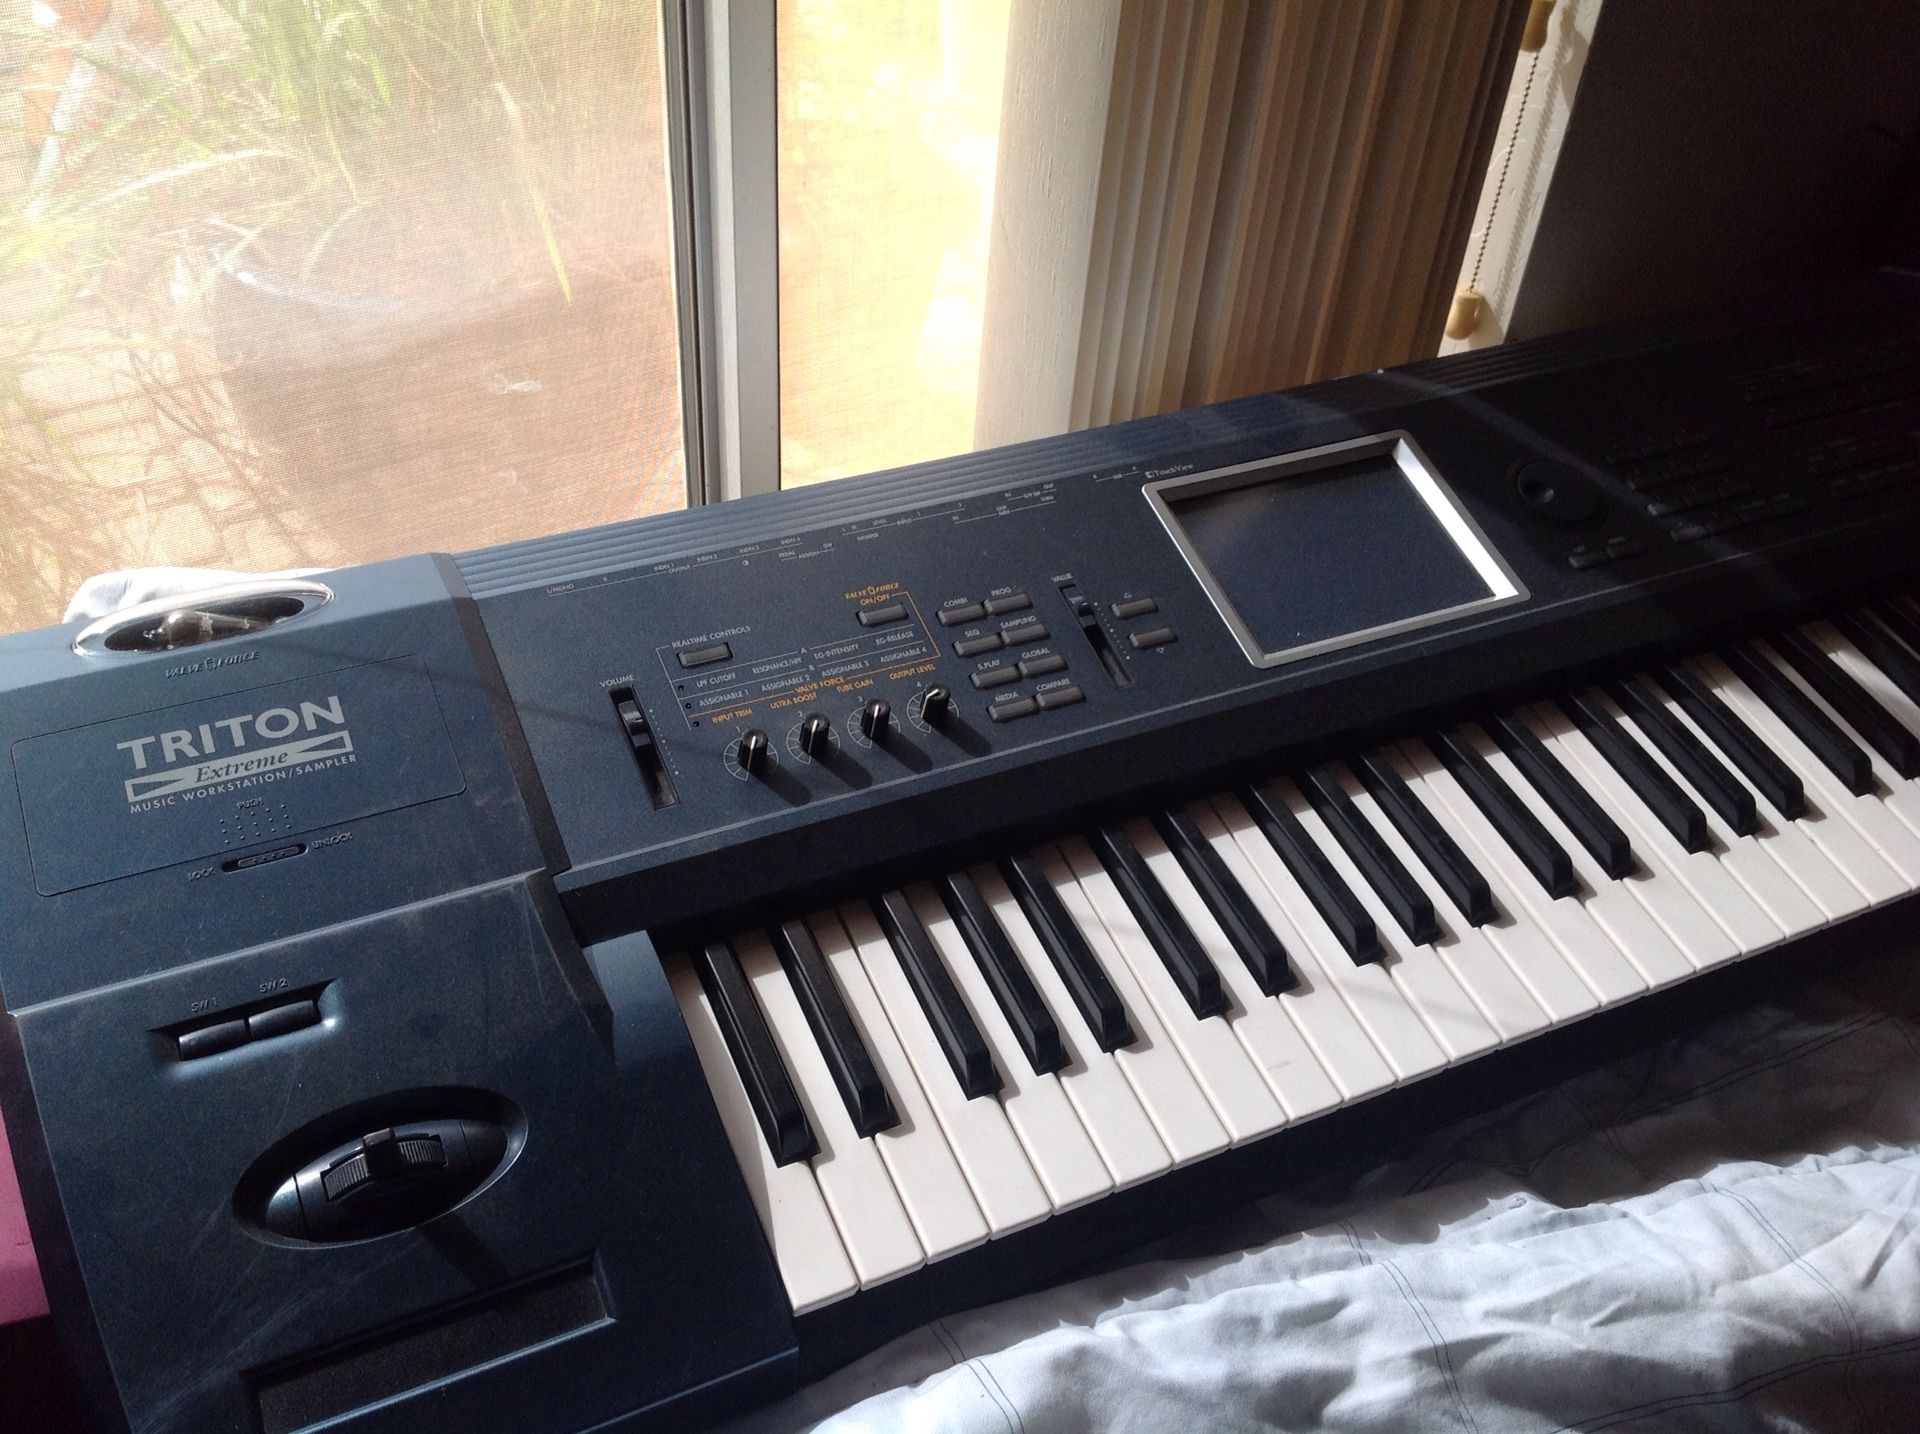 Korg Triton extreme 61 keys with 48 meg of rams for sound sampling... Call or text 4O8 499 97OI to purchase